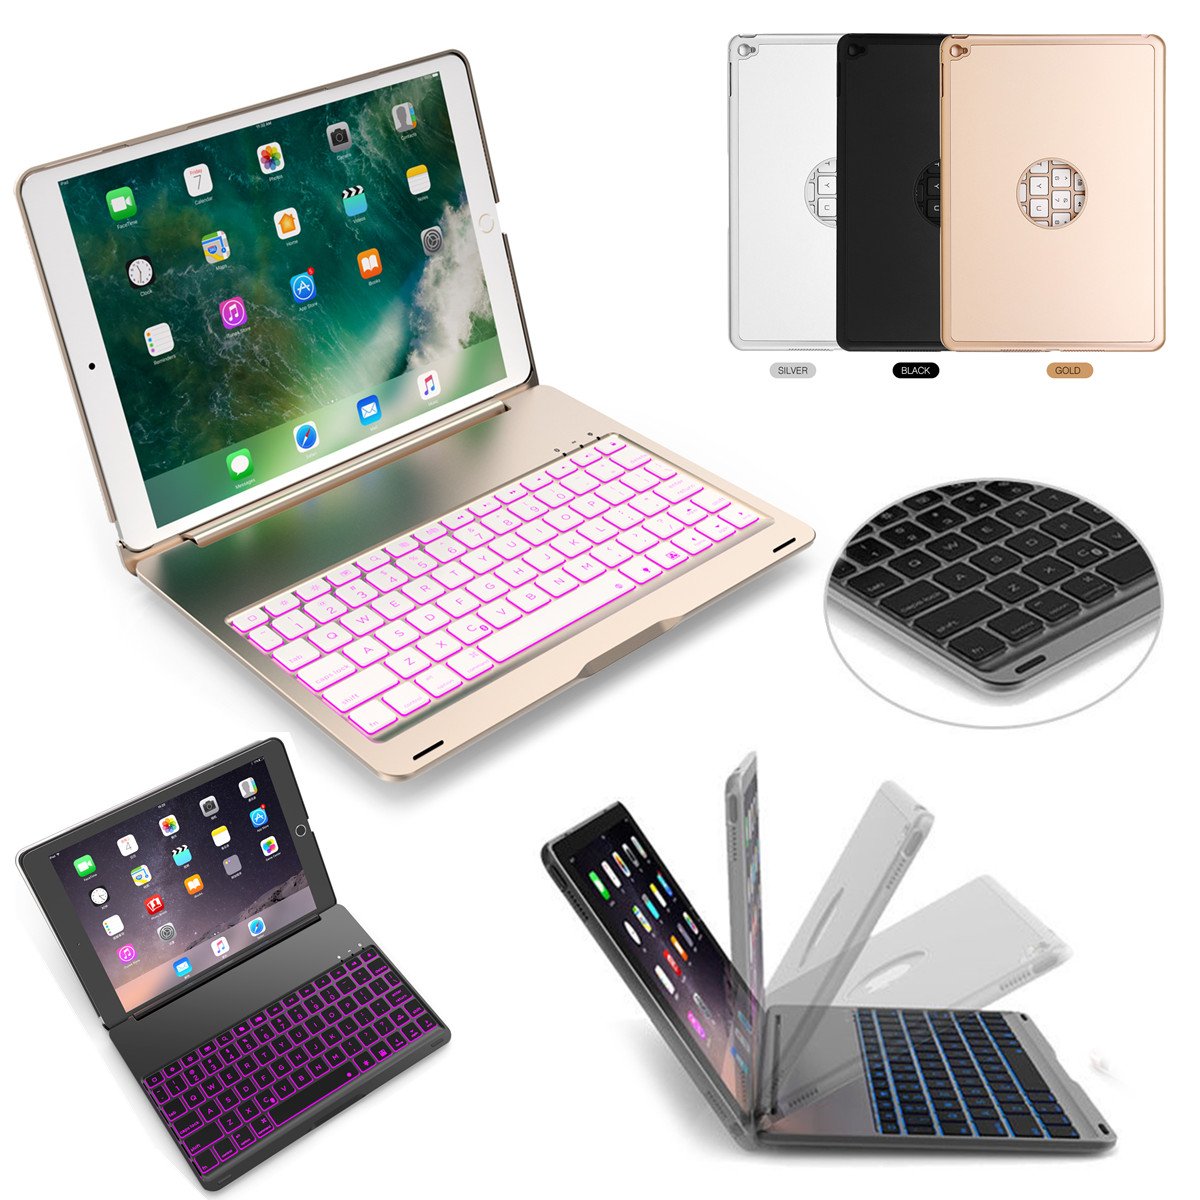 7 Colors Backlit Aluminum Alloy Wireless bluetooth Keyboard Case For iPad Air/iPad Air 2 2